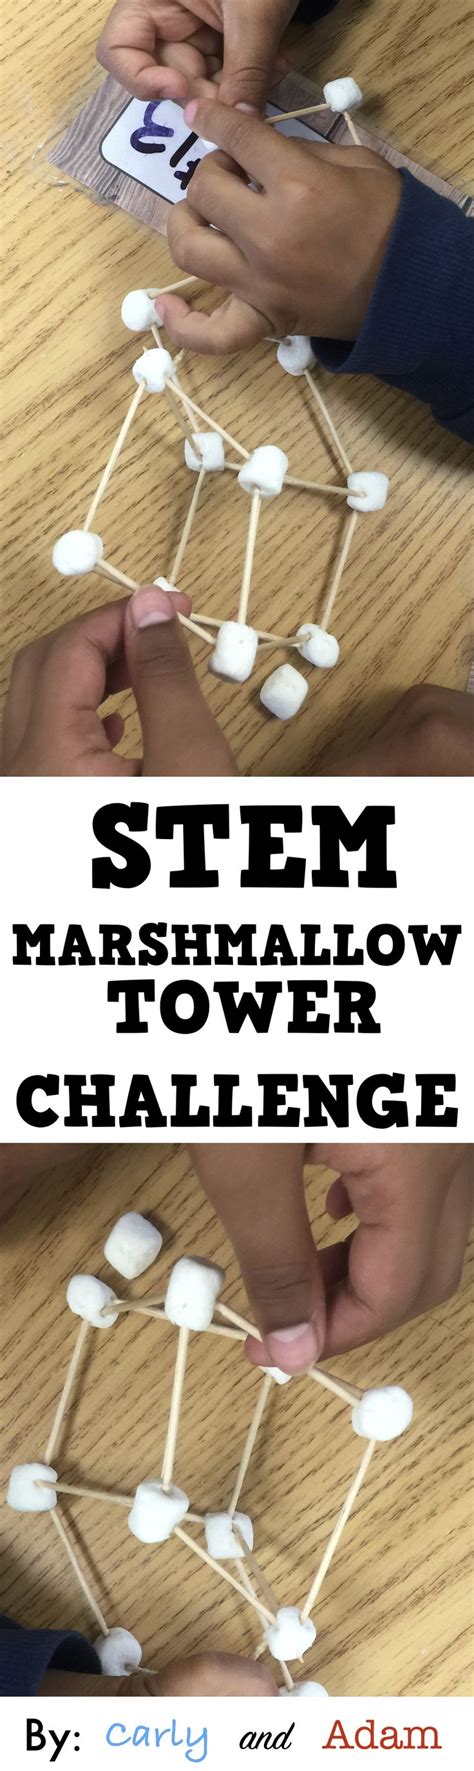 Team Building Stem Challenge Build A Tower Out Of Marshmallows And